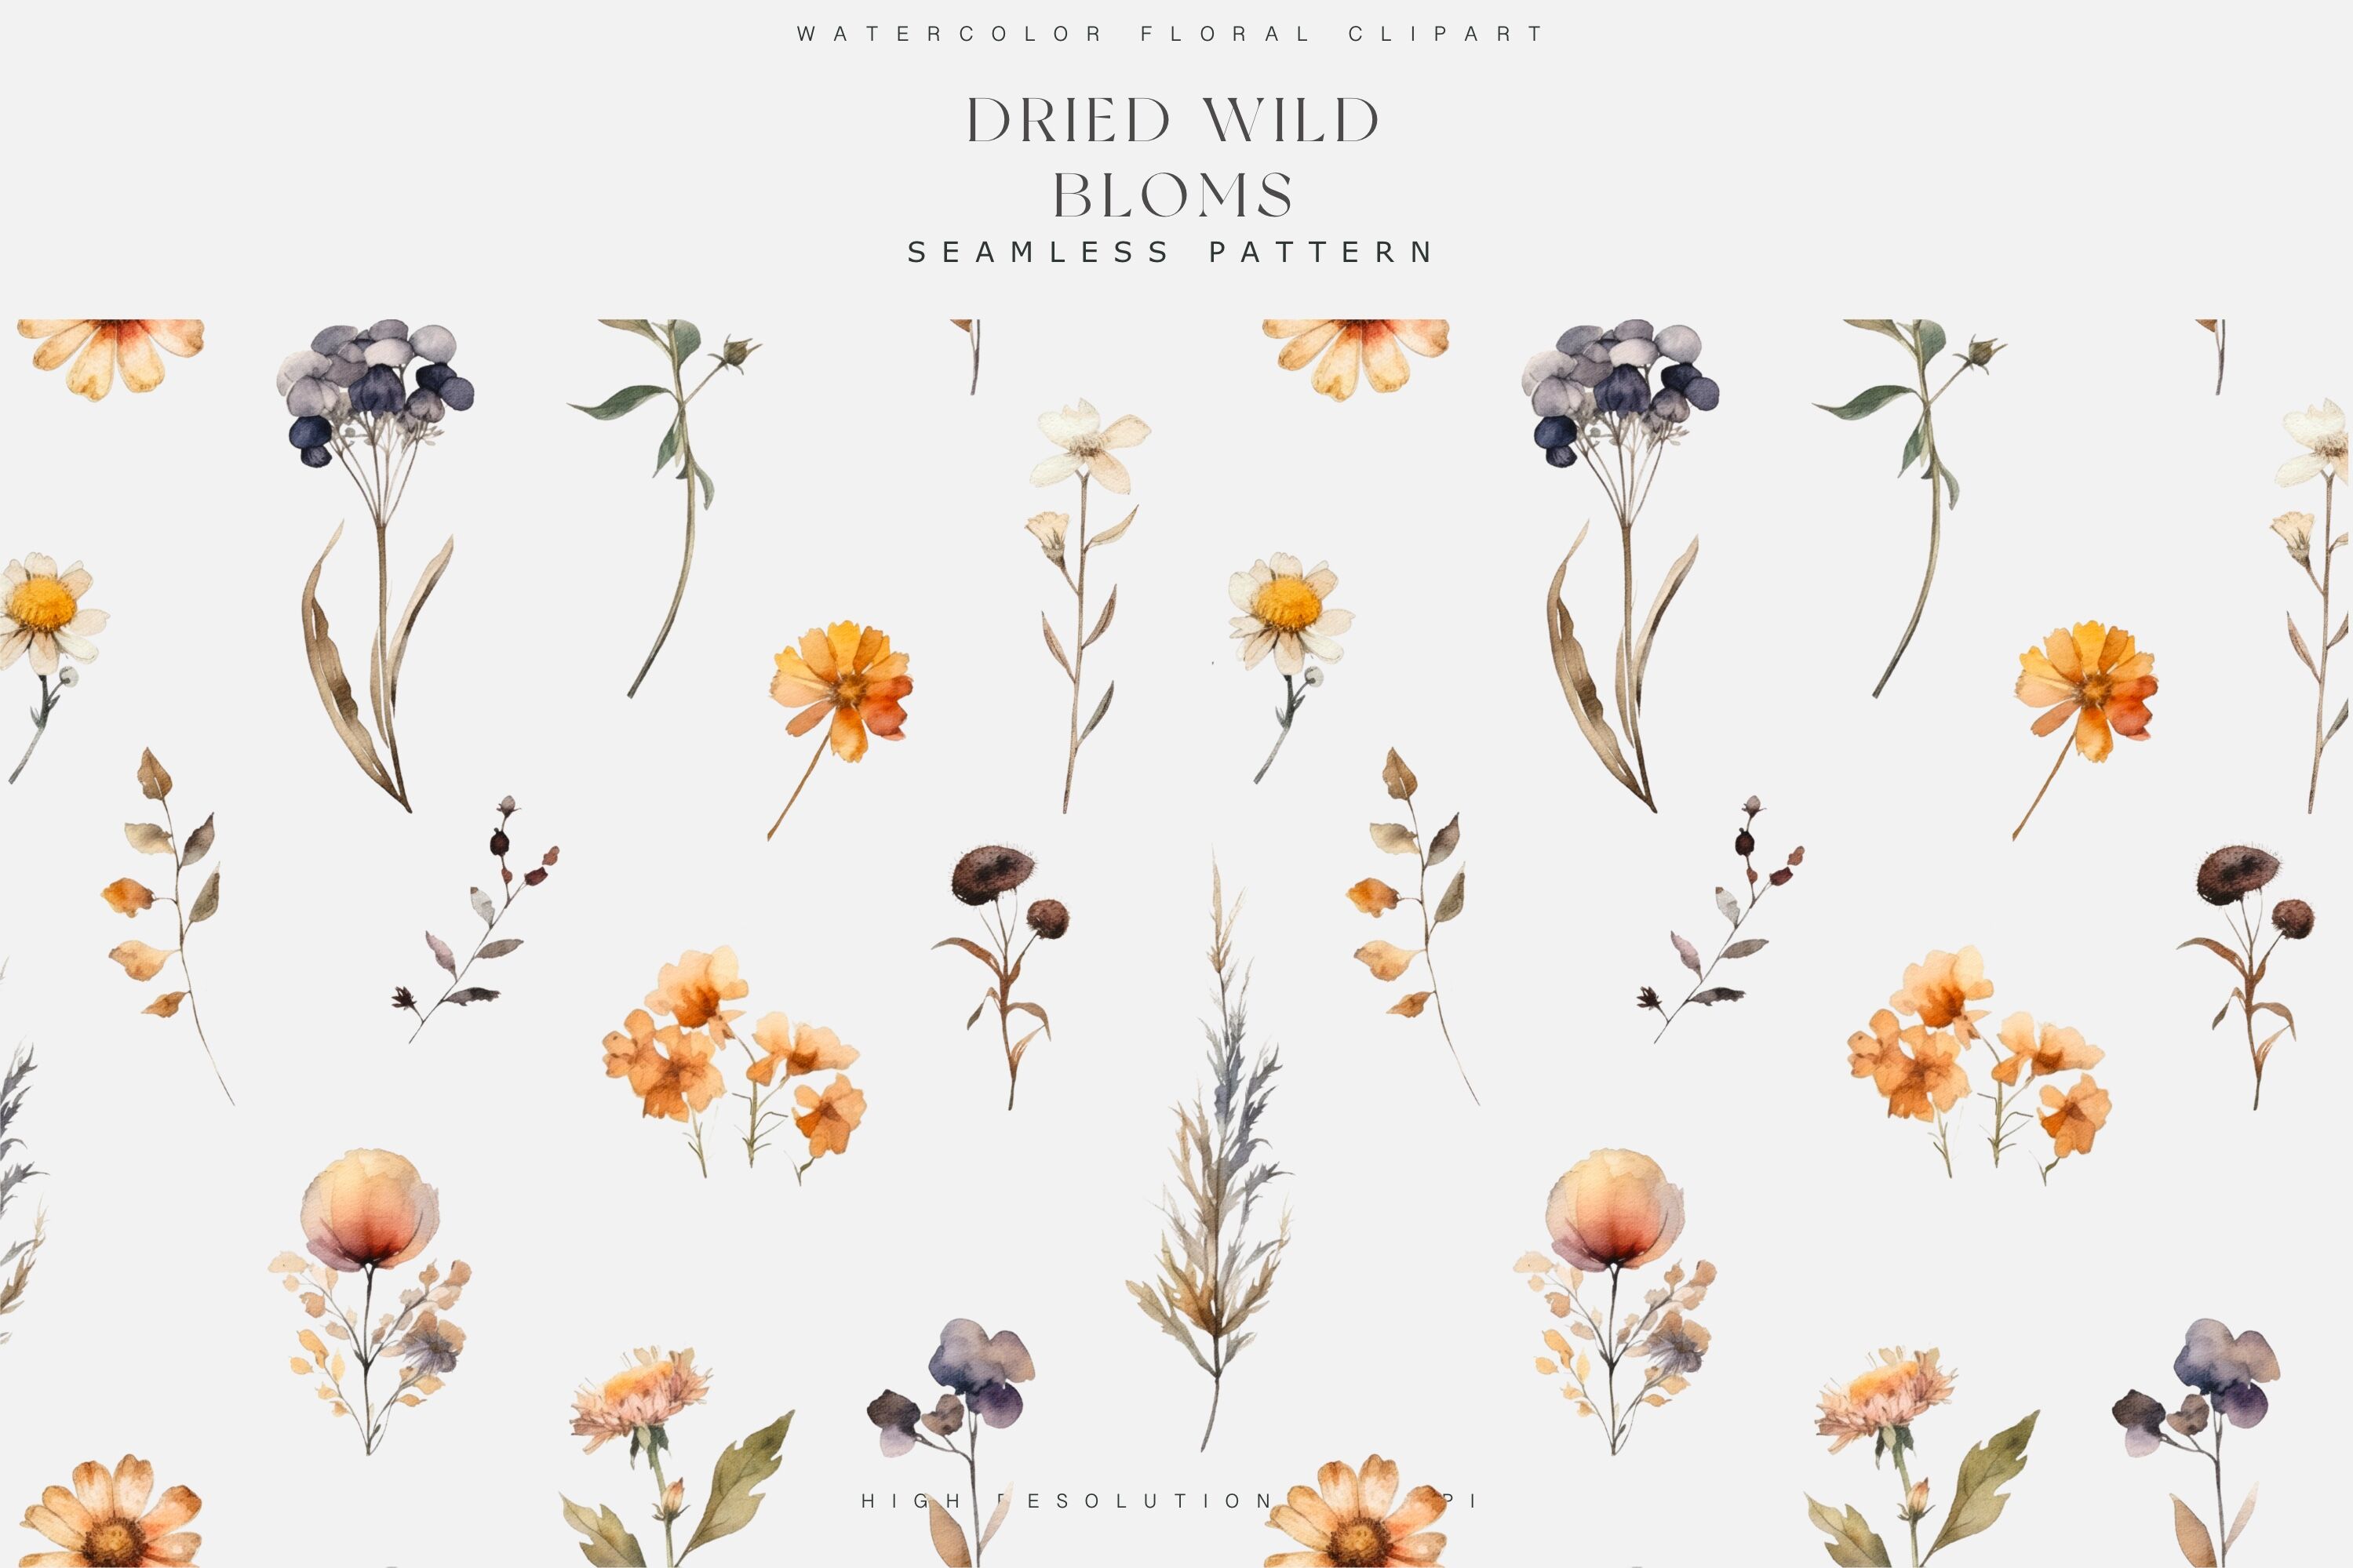 Watercolor Dried Wildflowers Clipart Collection